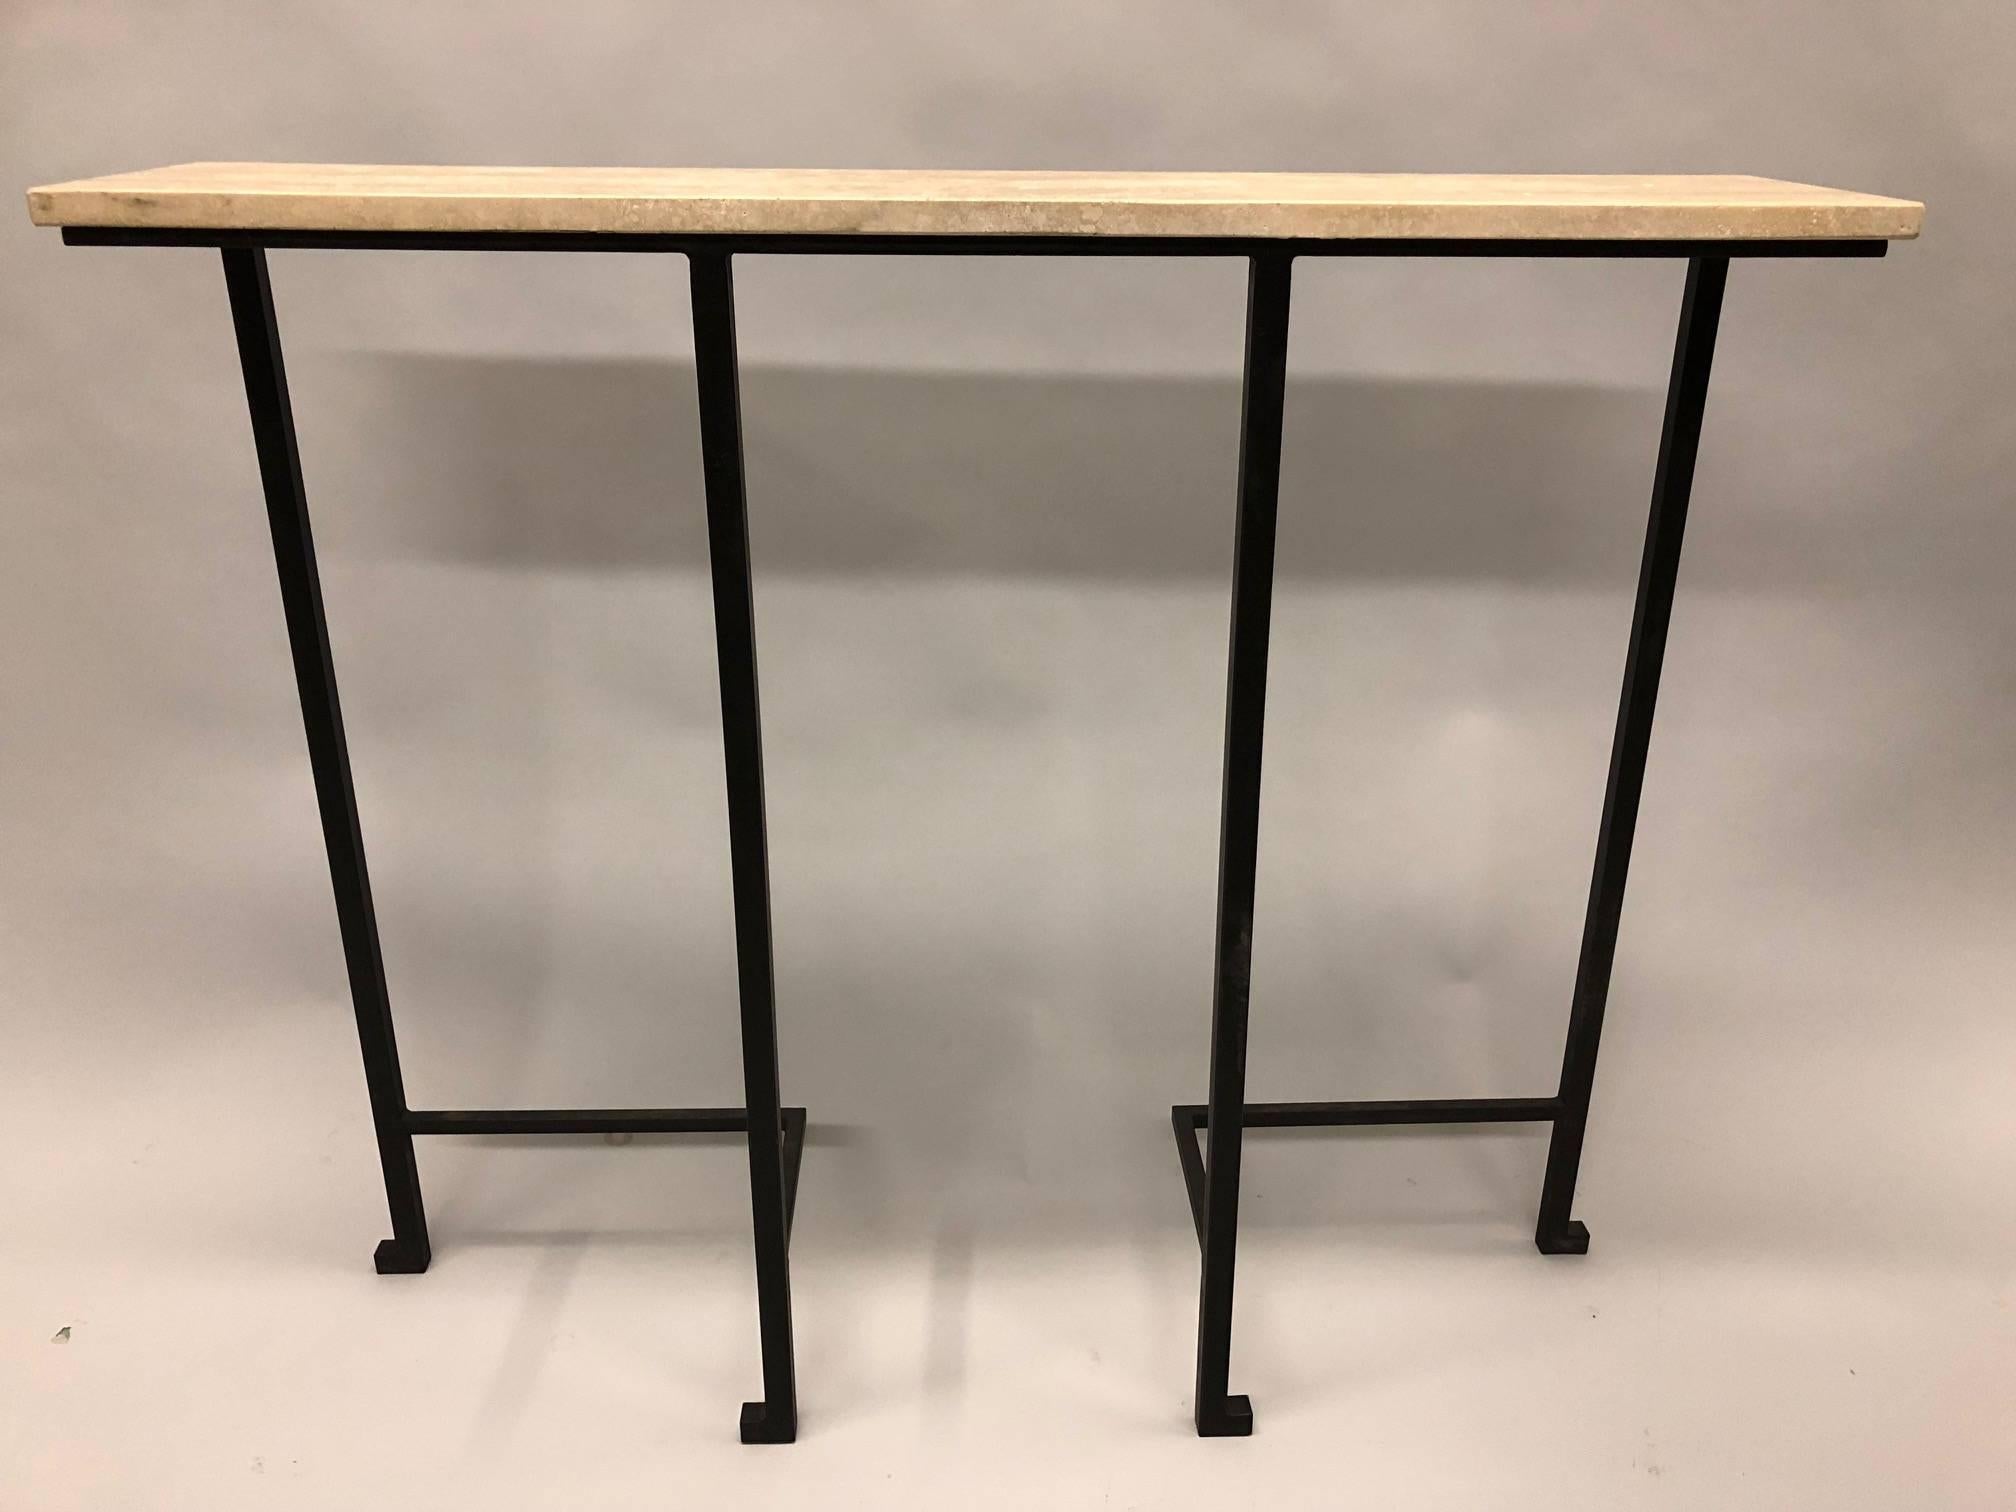 2 French Mid-Century Modern Style Wrought Iron & Stone Consoles, Marc Duplantier In Excellent Condition For Sale In New York, NY